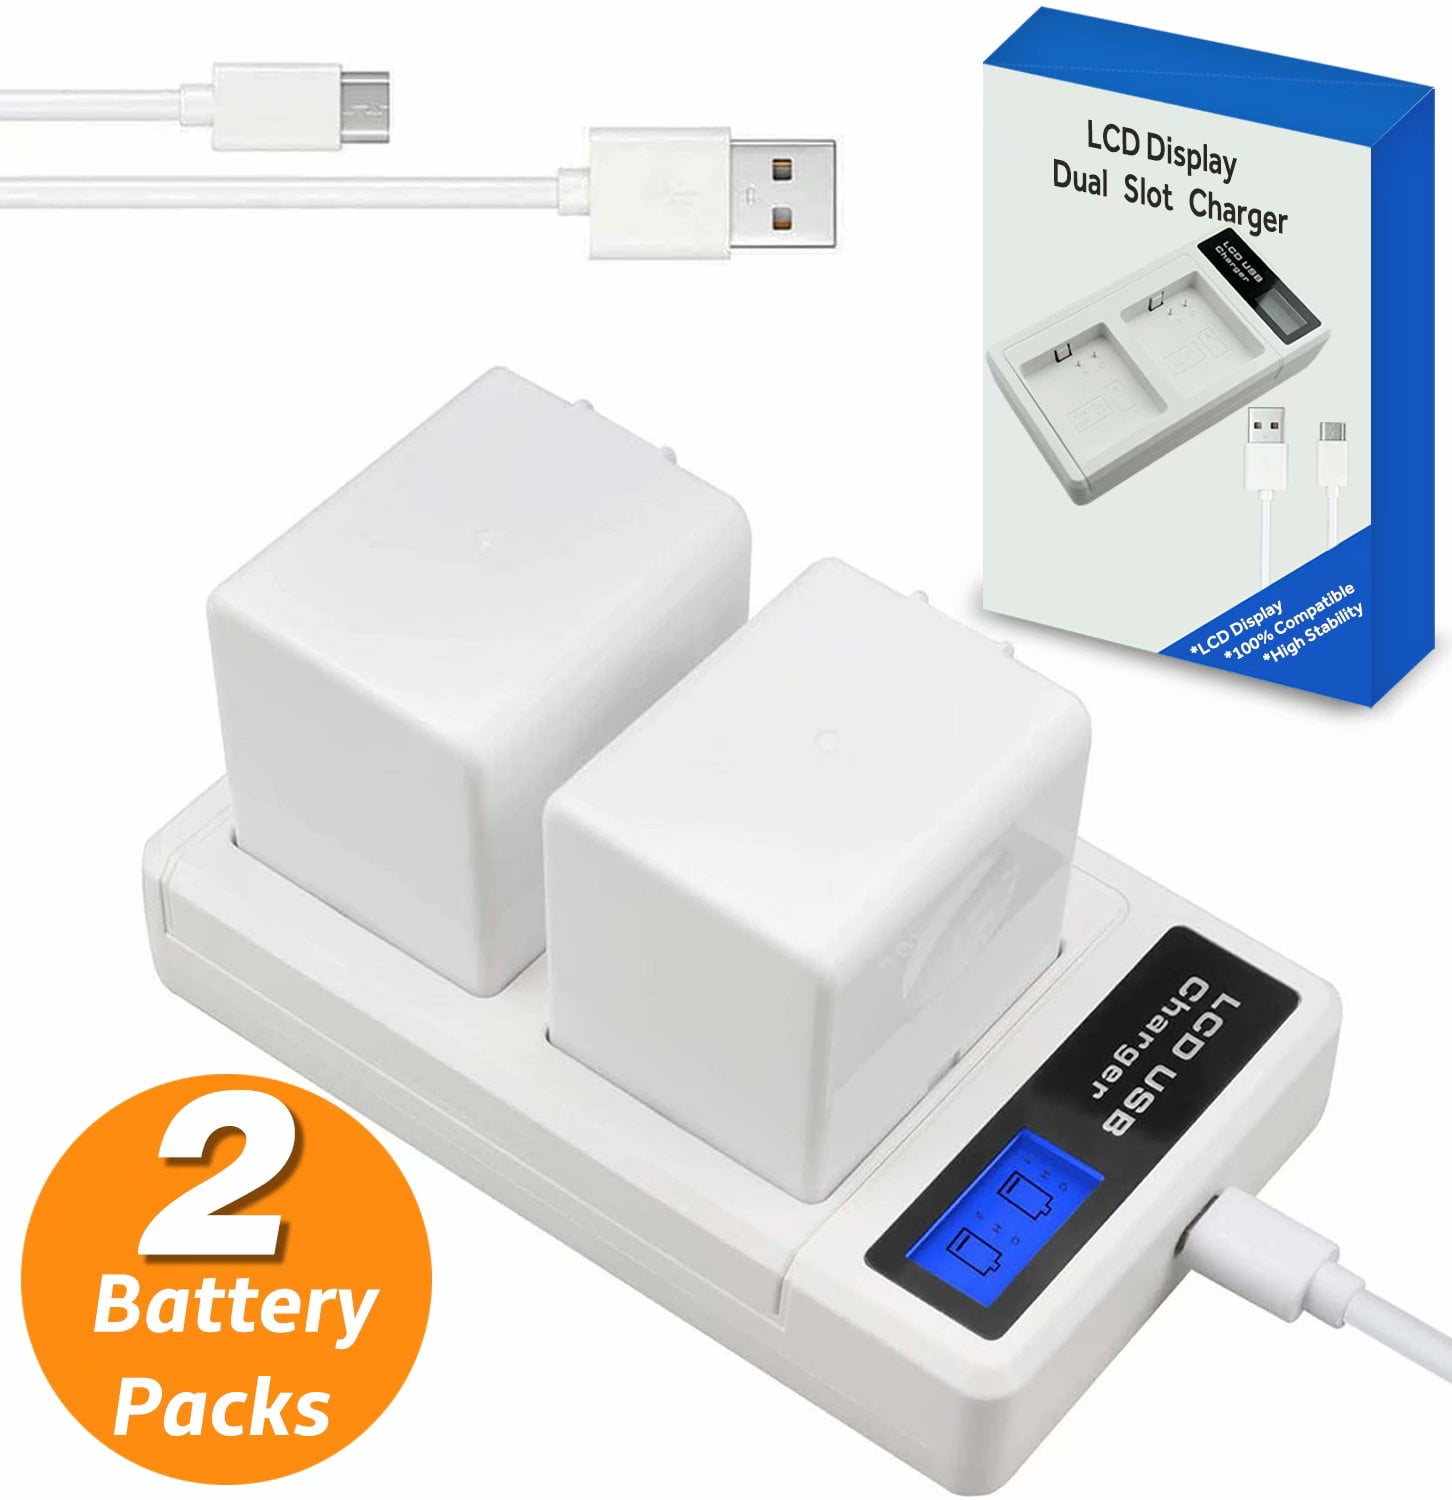 Charging Station For Arlo Pro Go Rechargeable Batteries Two Slots USB Cable New 